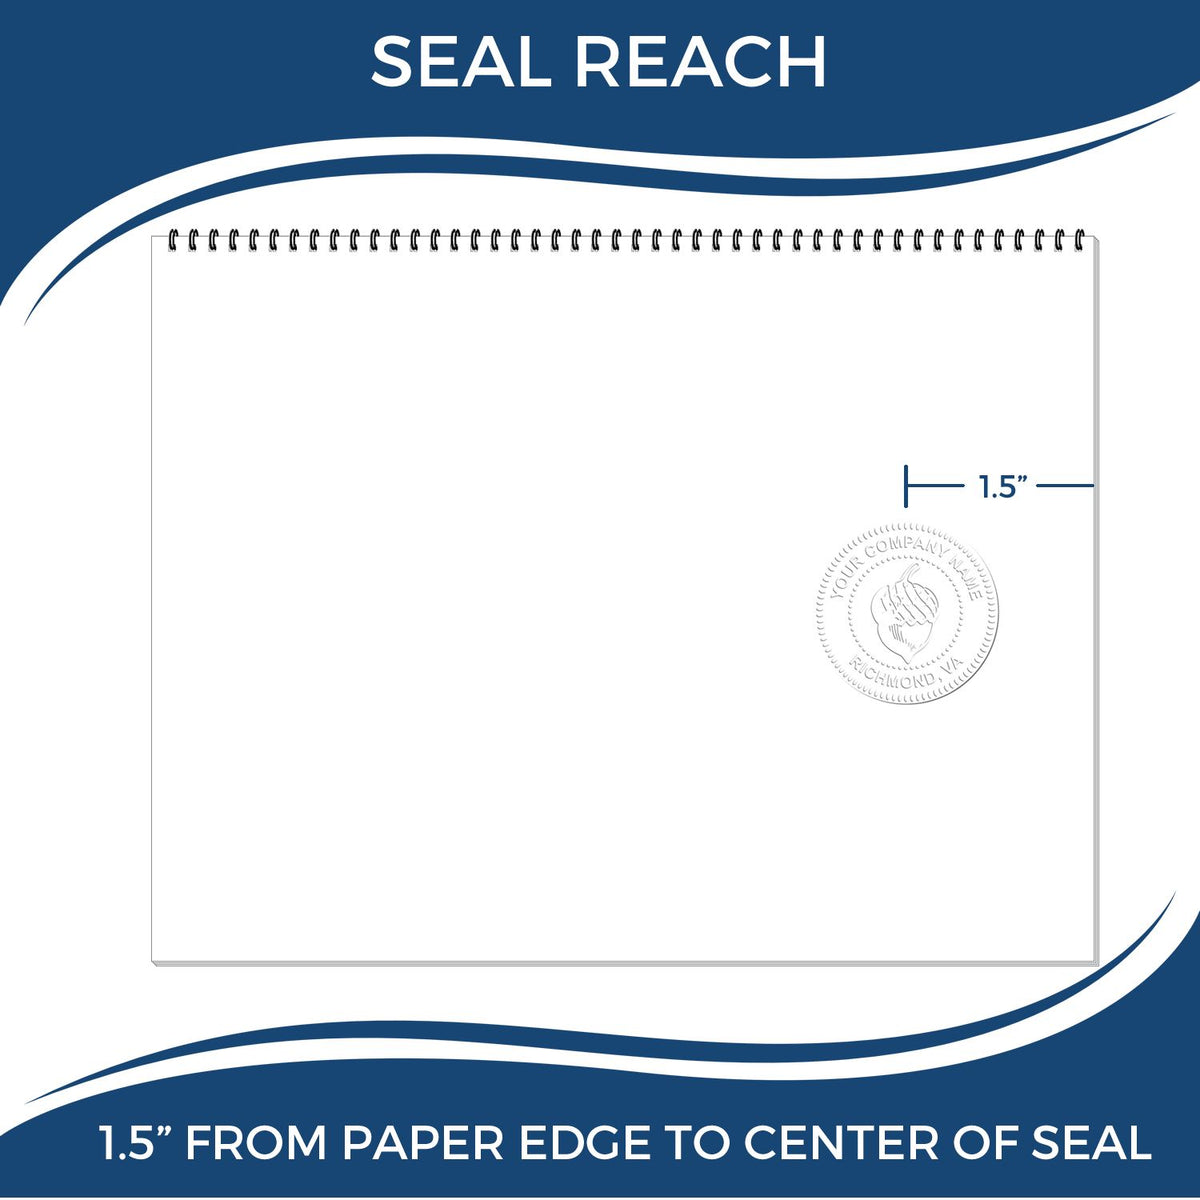 An infographic showing the seal reach which is represented by a ruler and a miniature seal image of the Gift Delaware Architect Seal